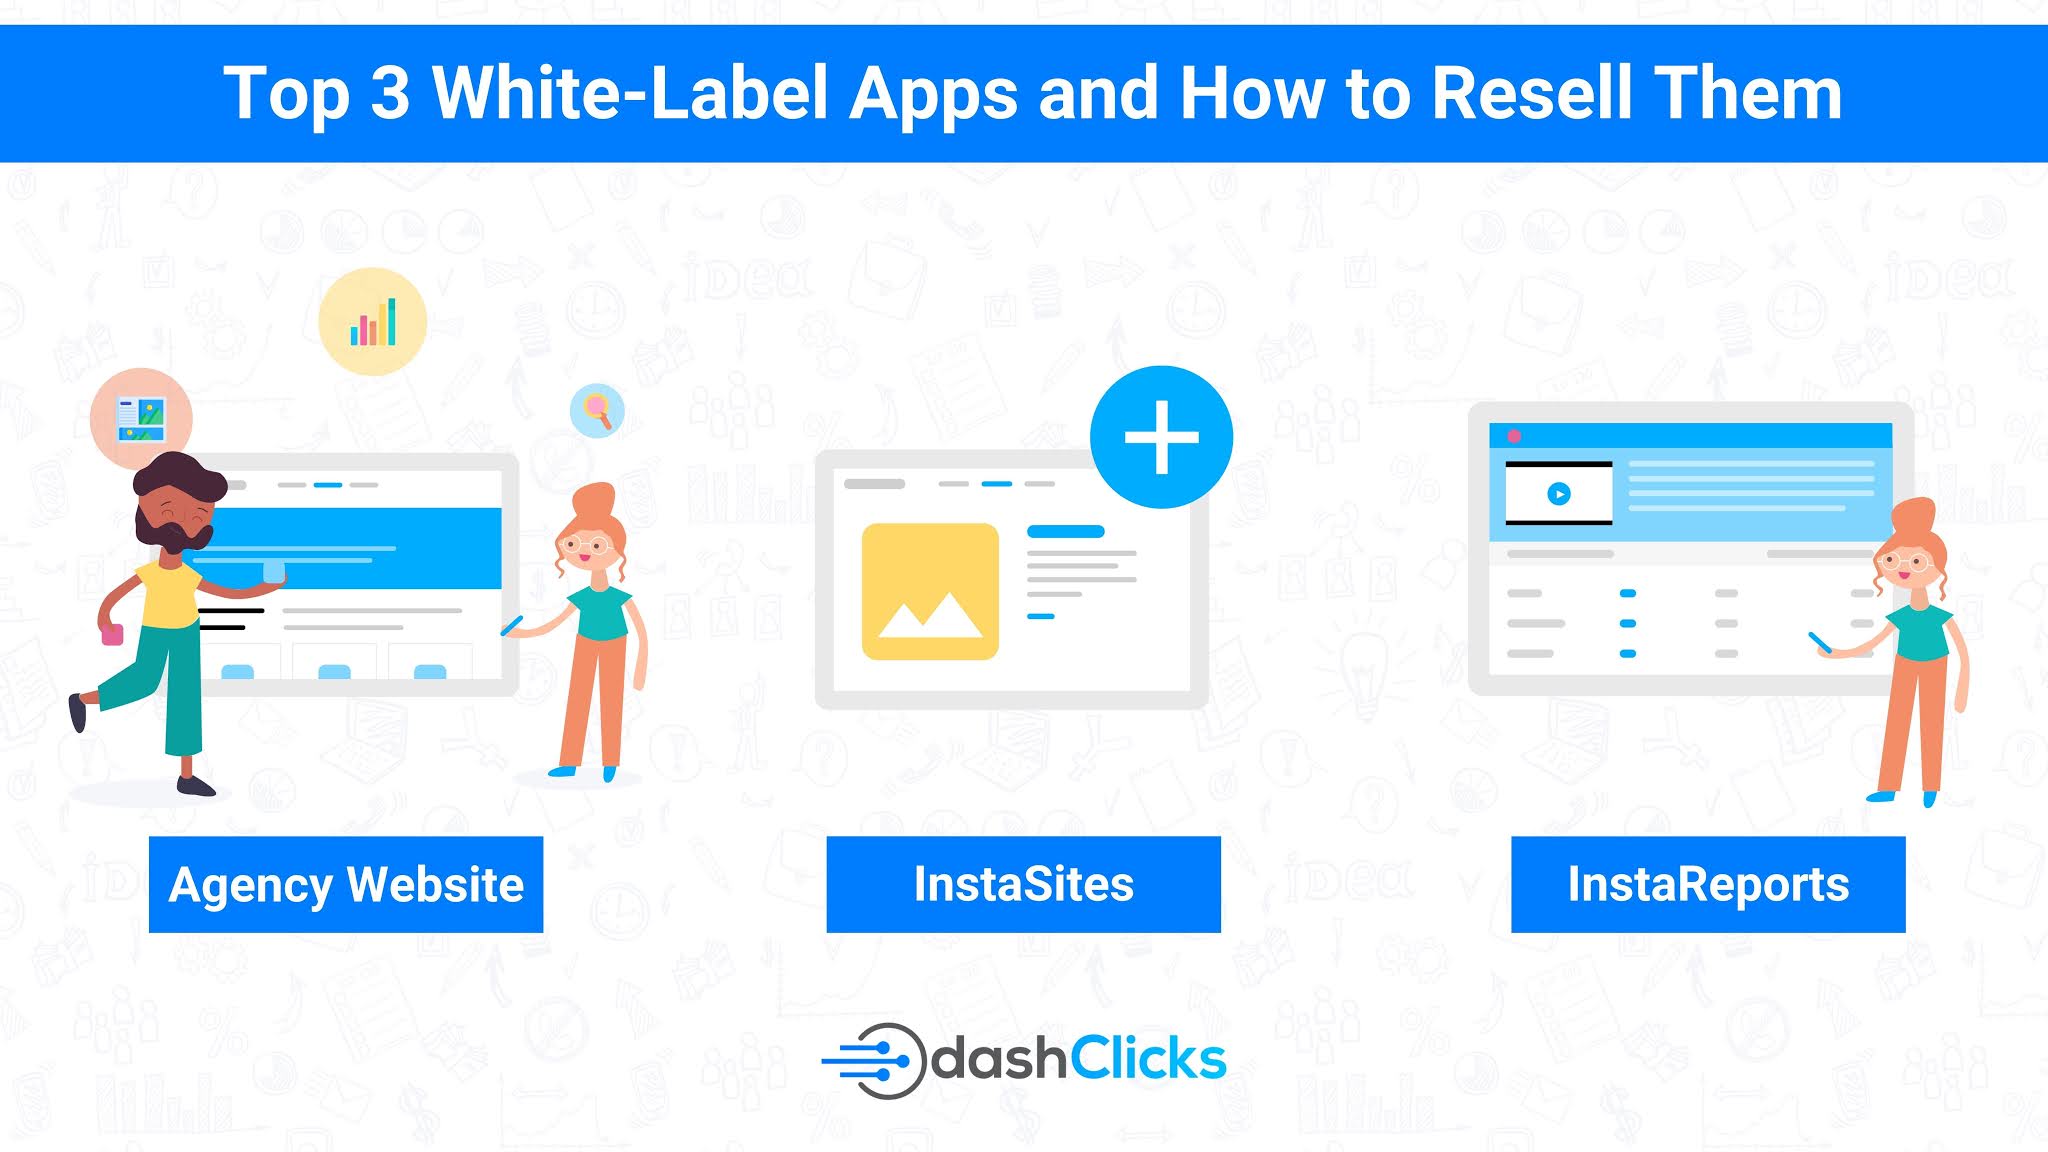 Top 3 white label apps to resell